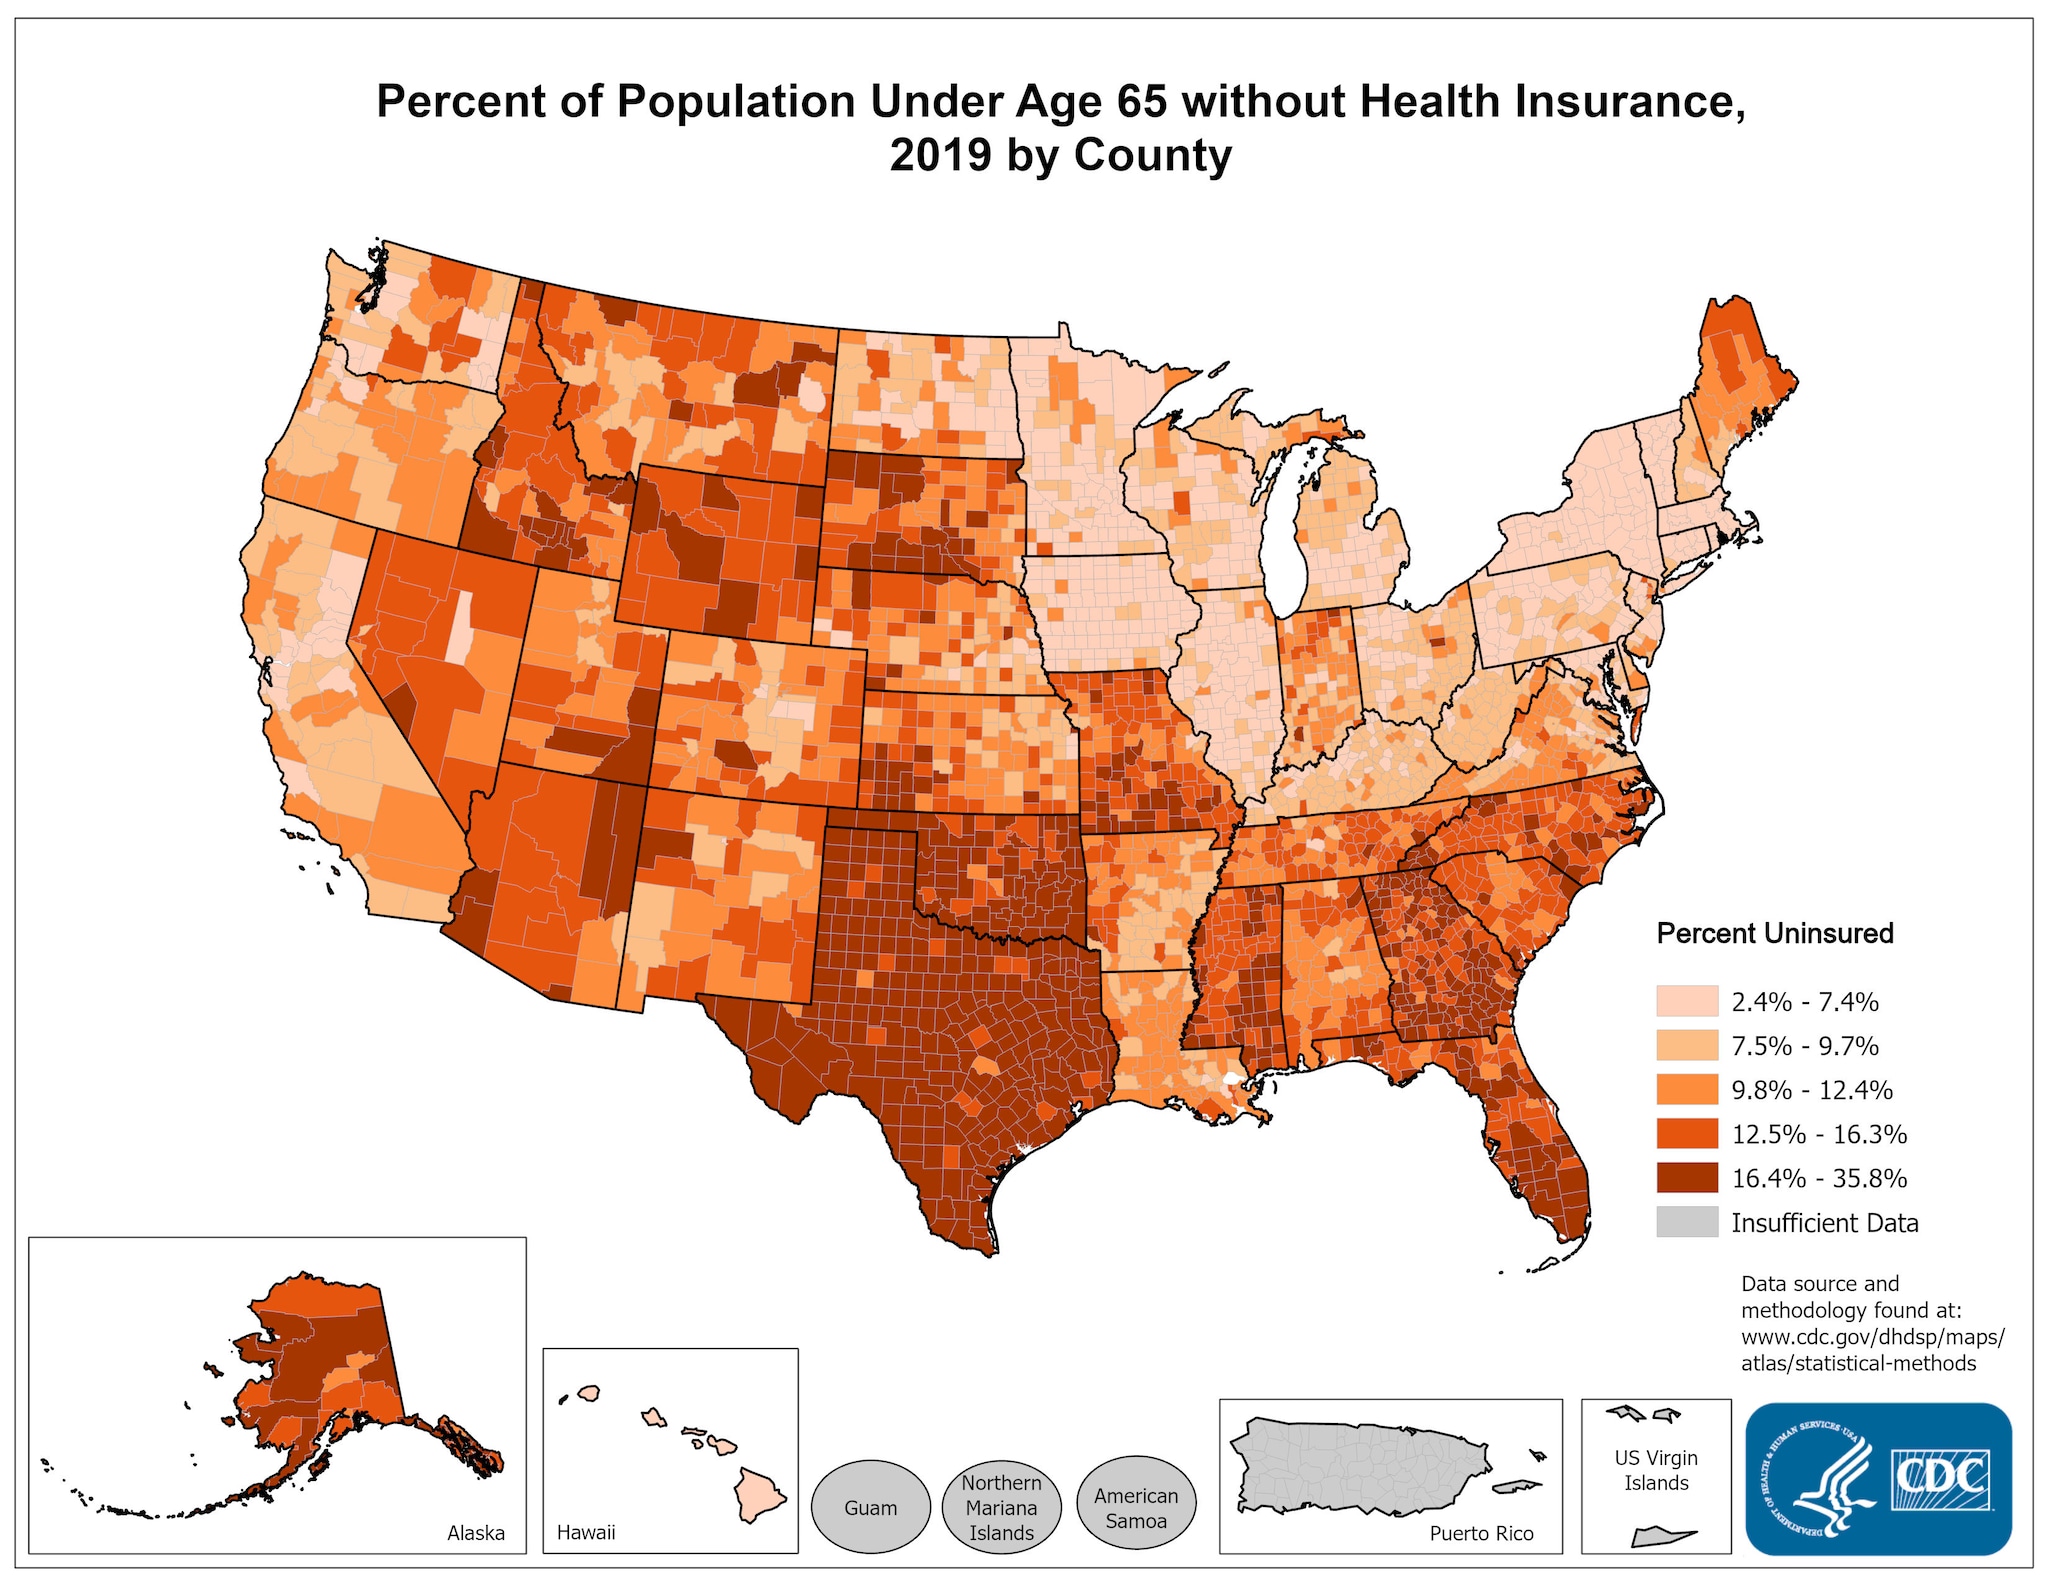 Percent Population under Age 65 without Health Insurance, 2014. Counties with the highest percentage of the population under age 65 without health insurance in 2014 were located primarily in Alaska, Texas, Georgia, Florida, Montana, New Mexico, and Arizona. The range in the percentage without health insurance was between 0% and 39.3%.